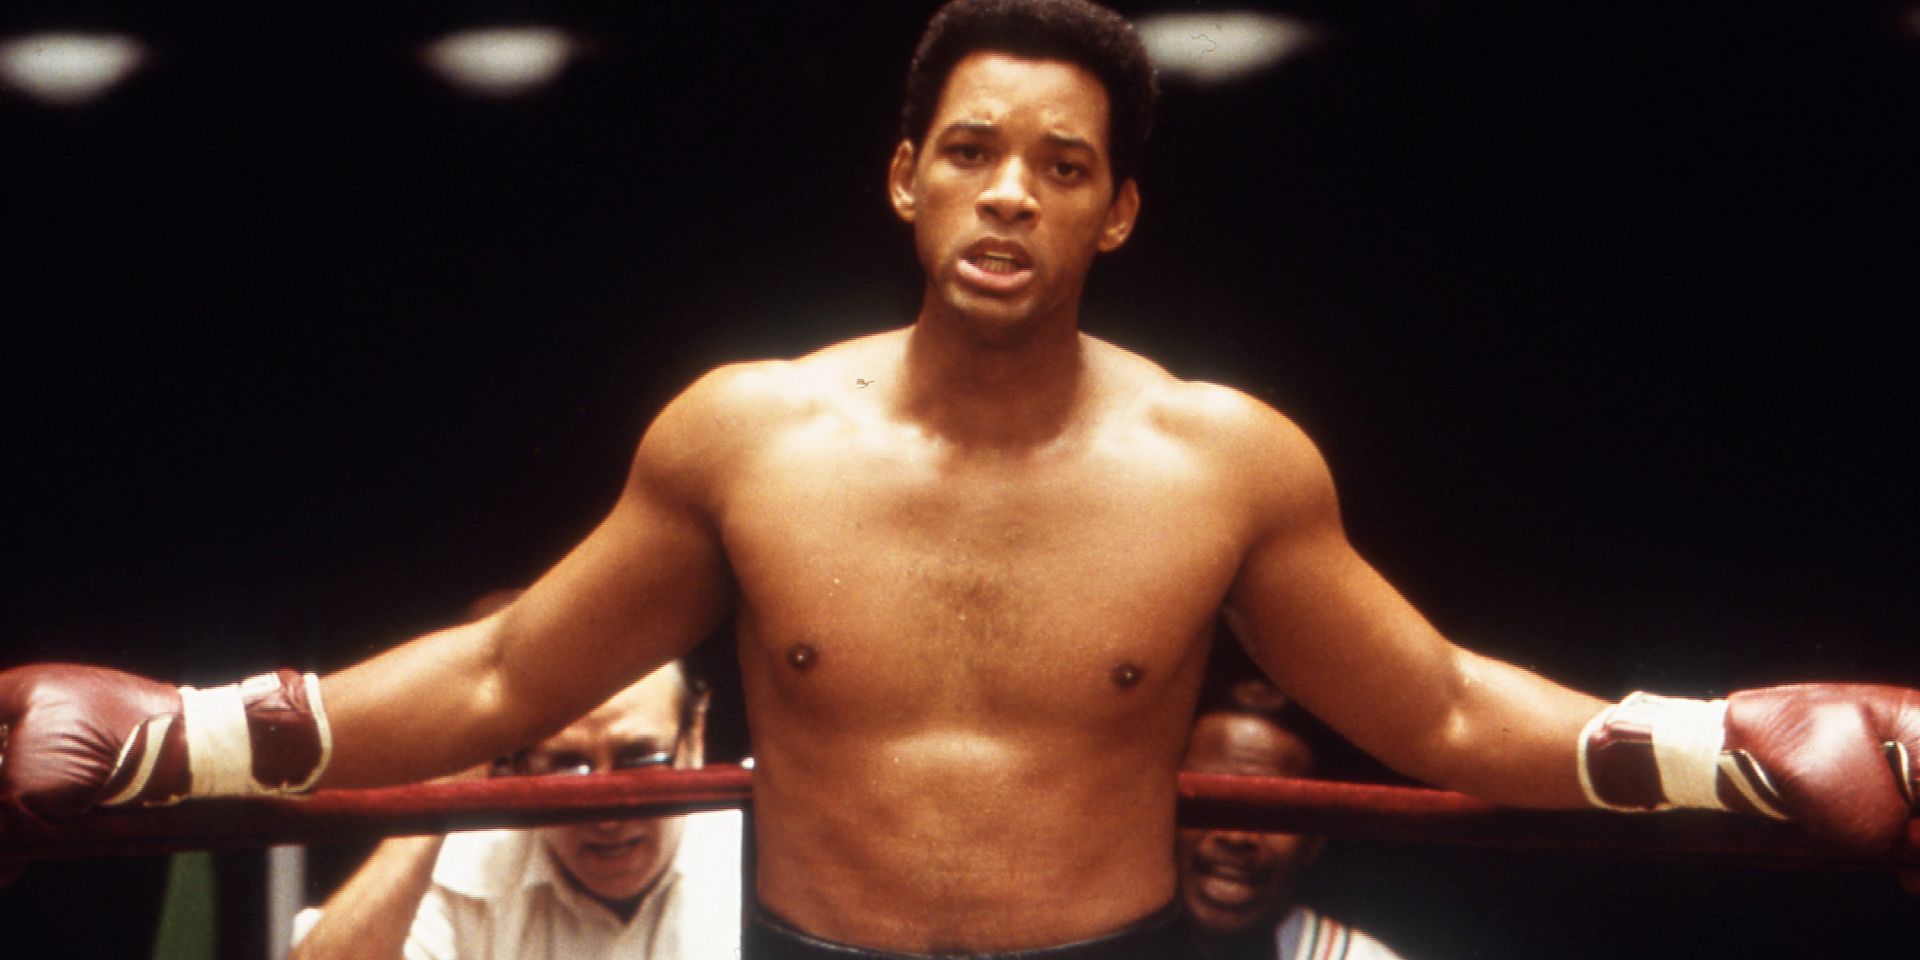 will smith in the ring as muhammad ali in the film ali